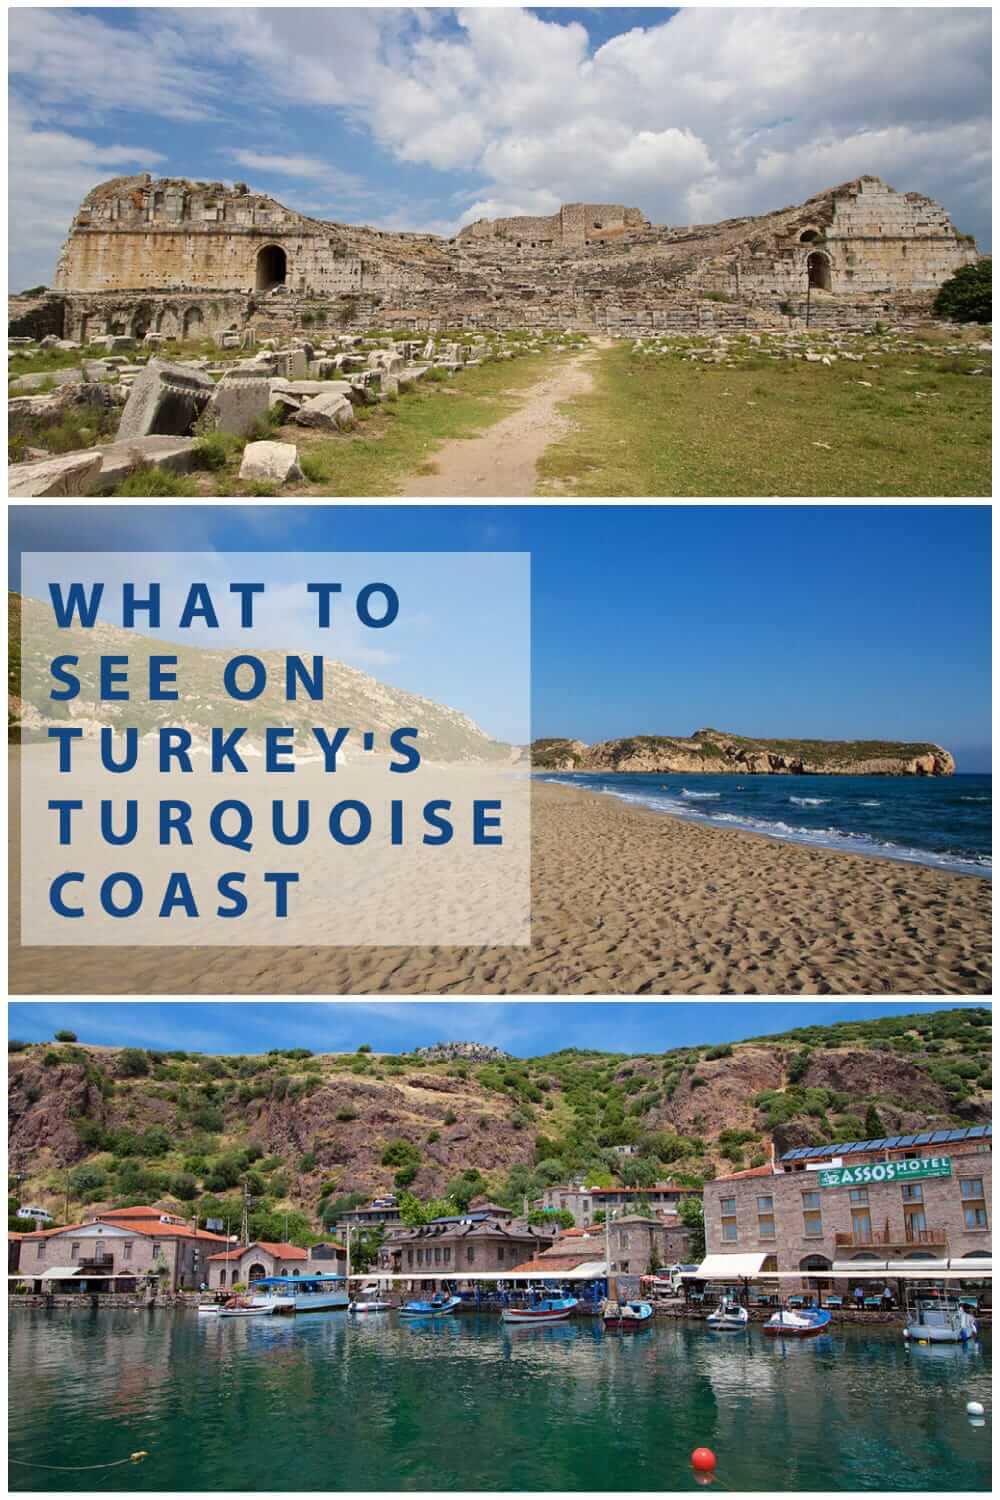 Coastal Turkey itinerary from Istanbul to Antalya along the Turquoise Coast for backpackers and independent travellers #travel #backpacking #travelplanning #europe